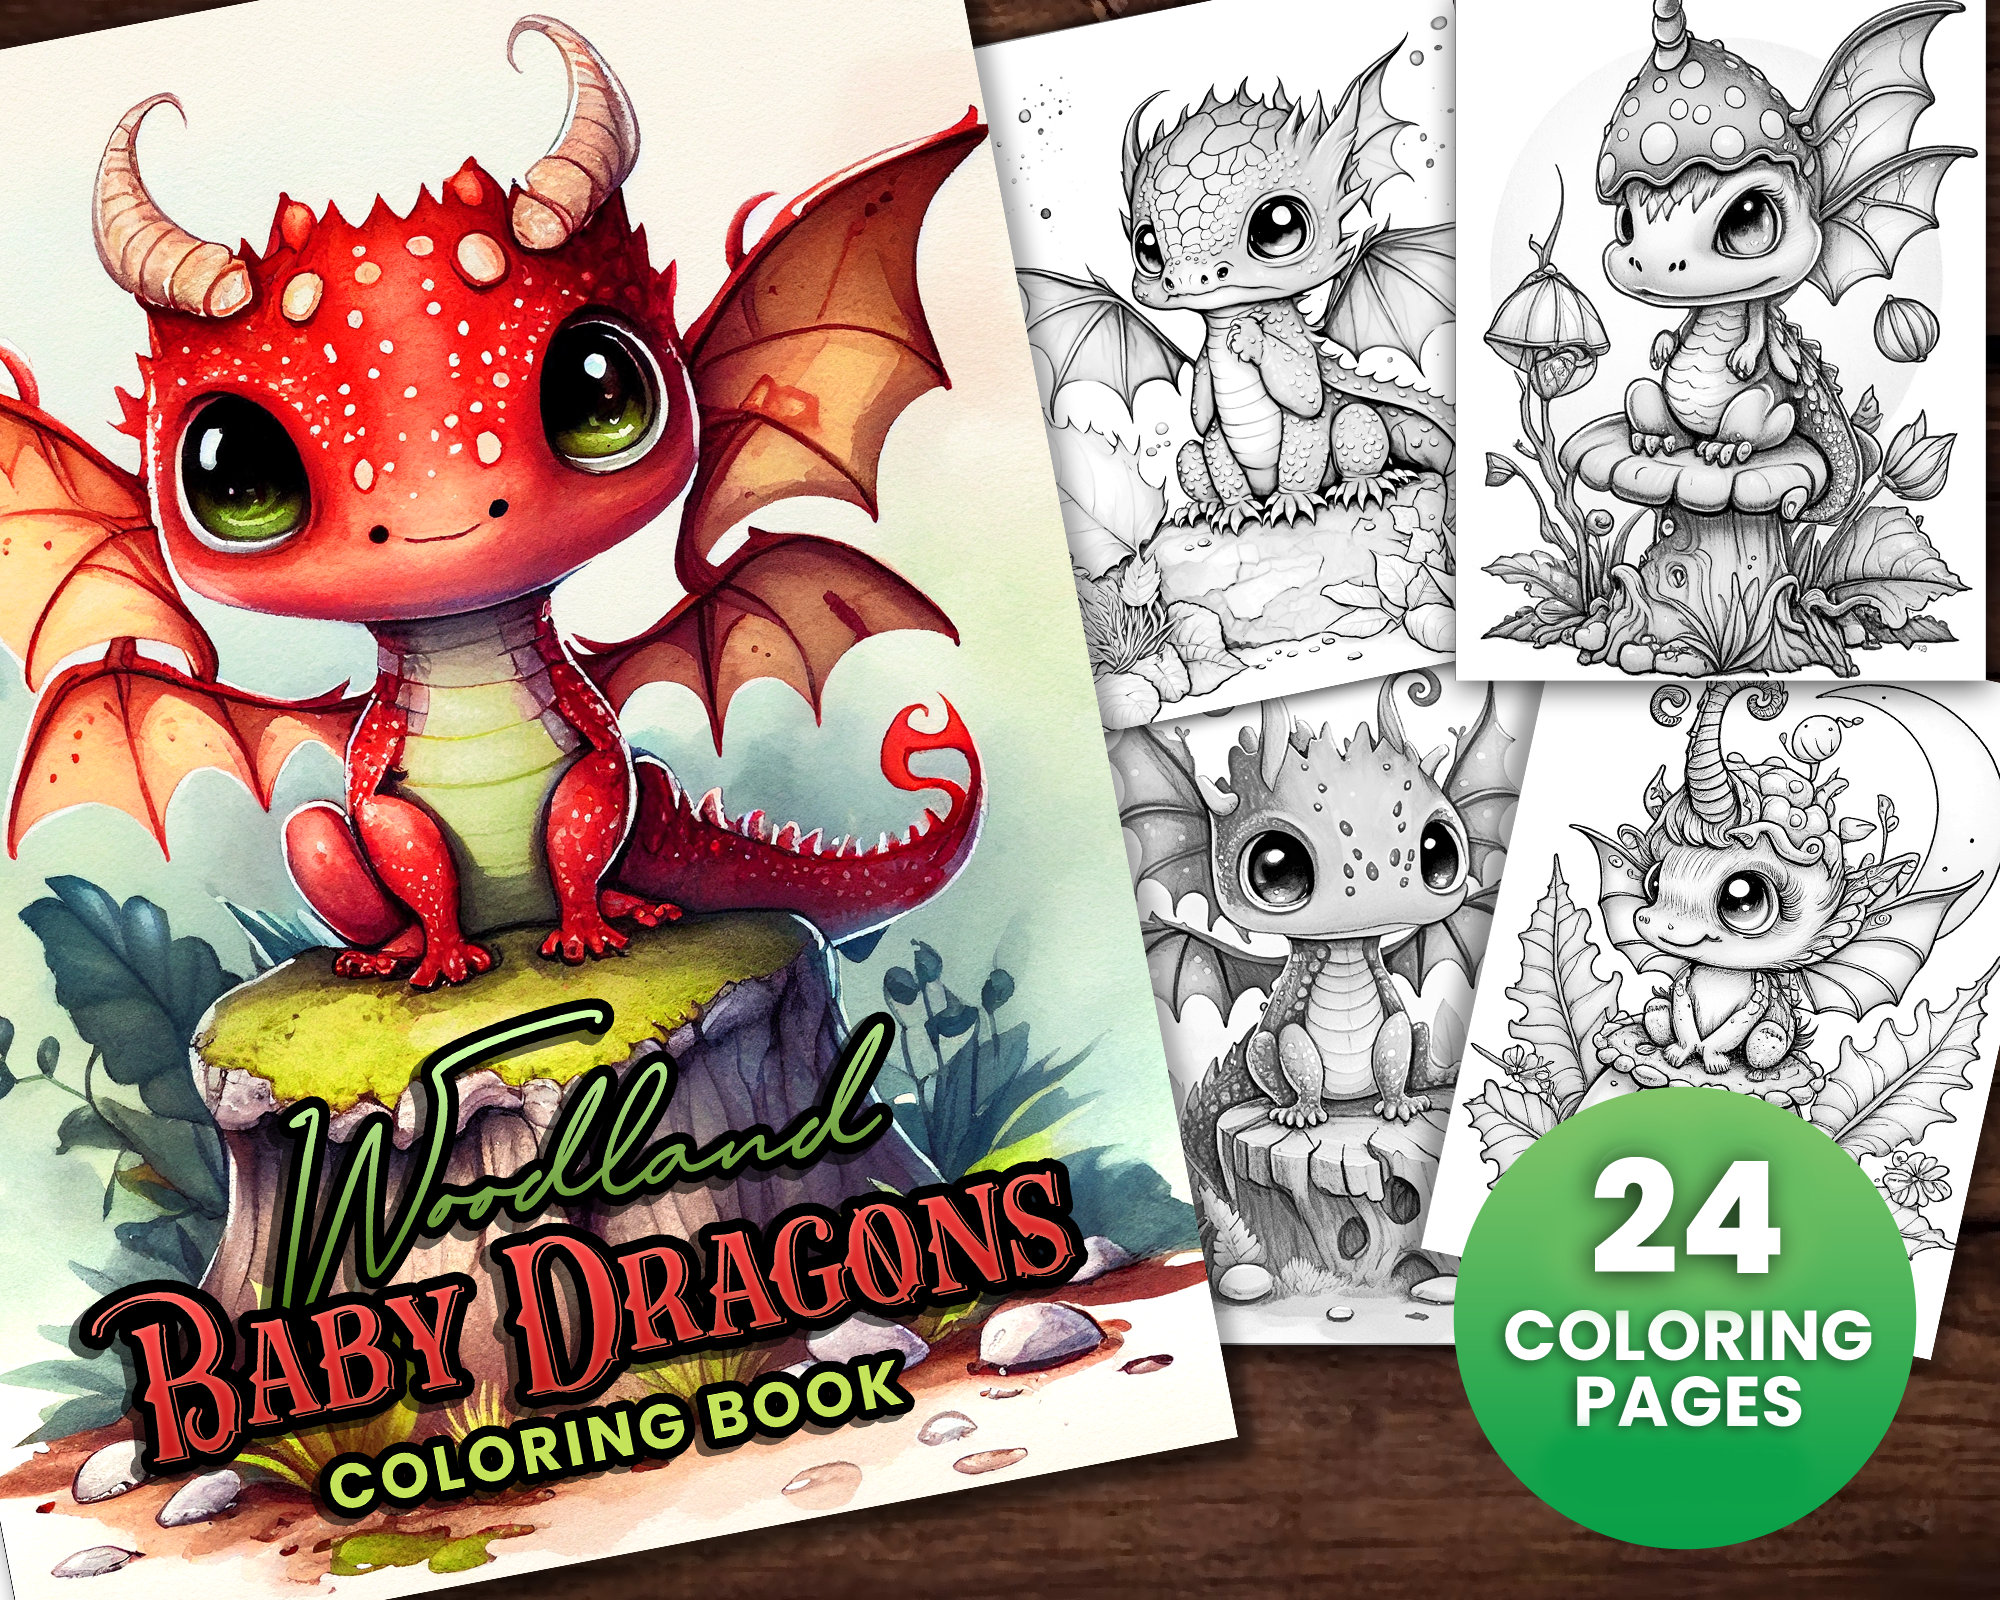 100 Baby Dragon Coloring Pages, Fantasy, Adults and Kids Coloring Book,  Digital Coloring Sheets, Instant Download, Printable PDF File. 